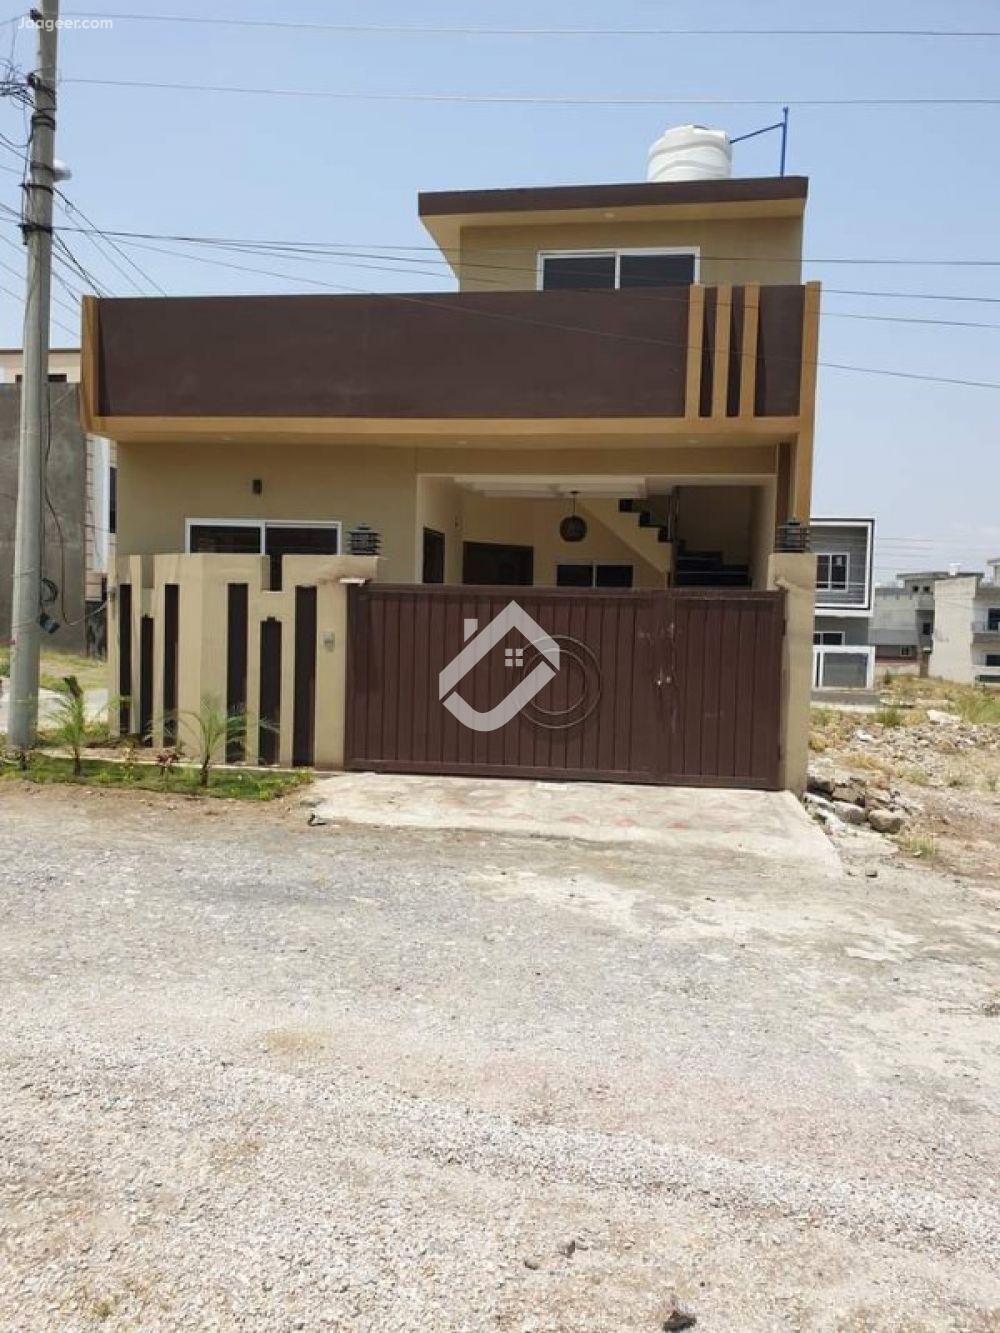 View  4 Marla Corner House For Sale In Wah Cantt New City Phase 2  in Wah Cantt, Rawalpindi